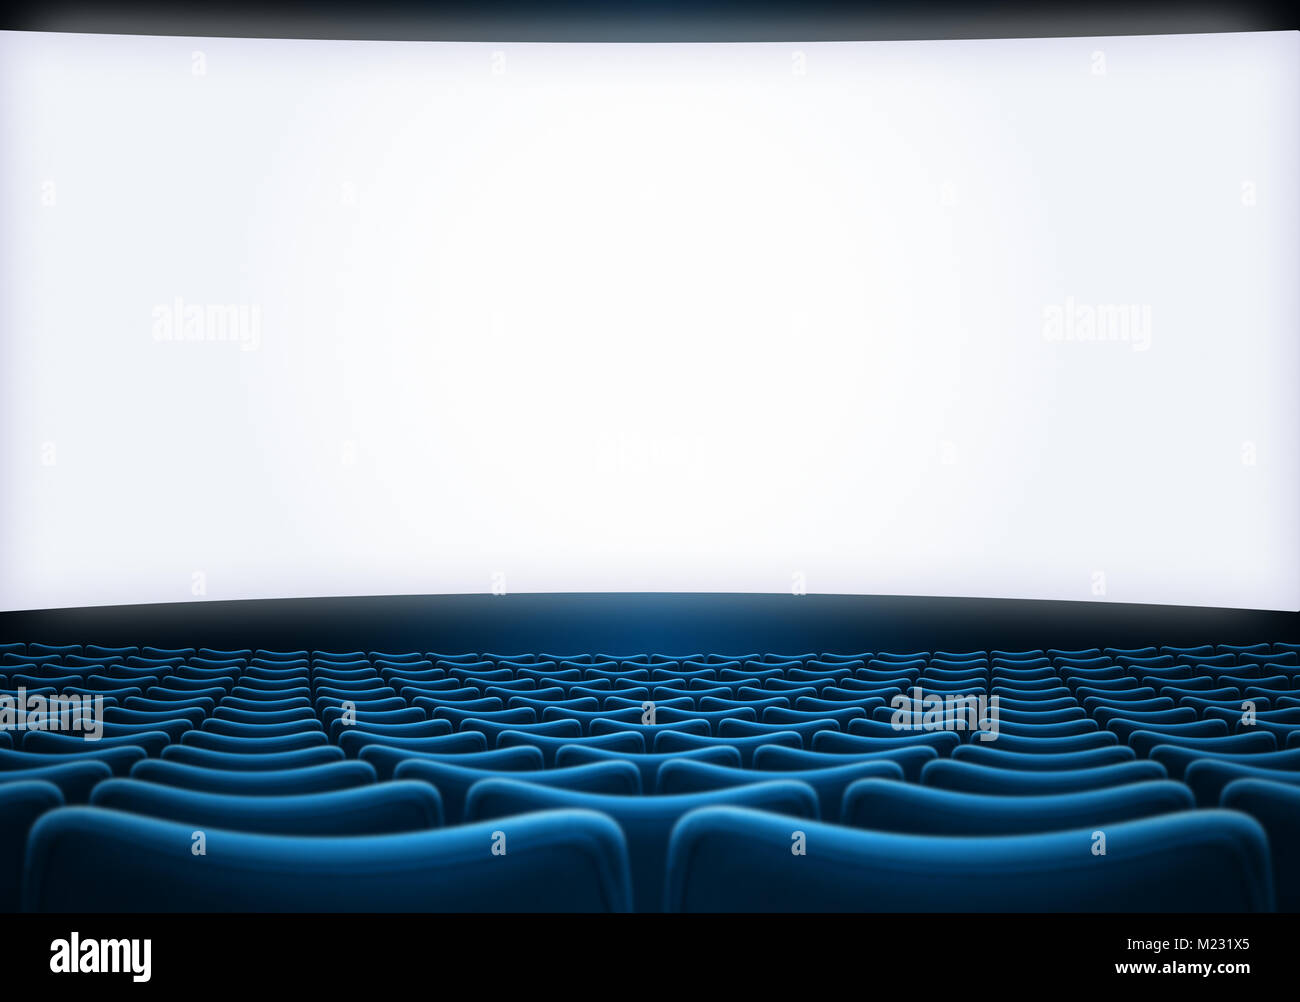 movie screen with blue seats theater backrgound 3d illustration Stock Photo